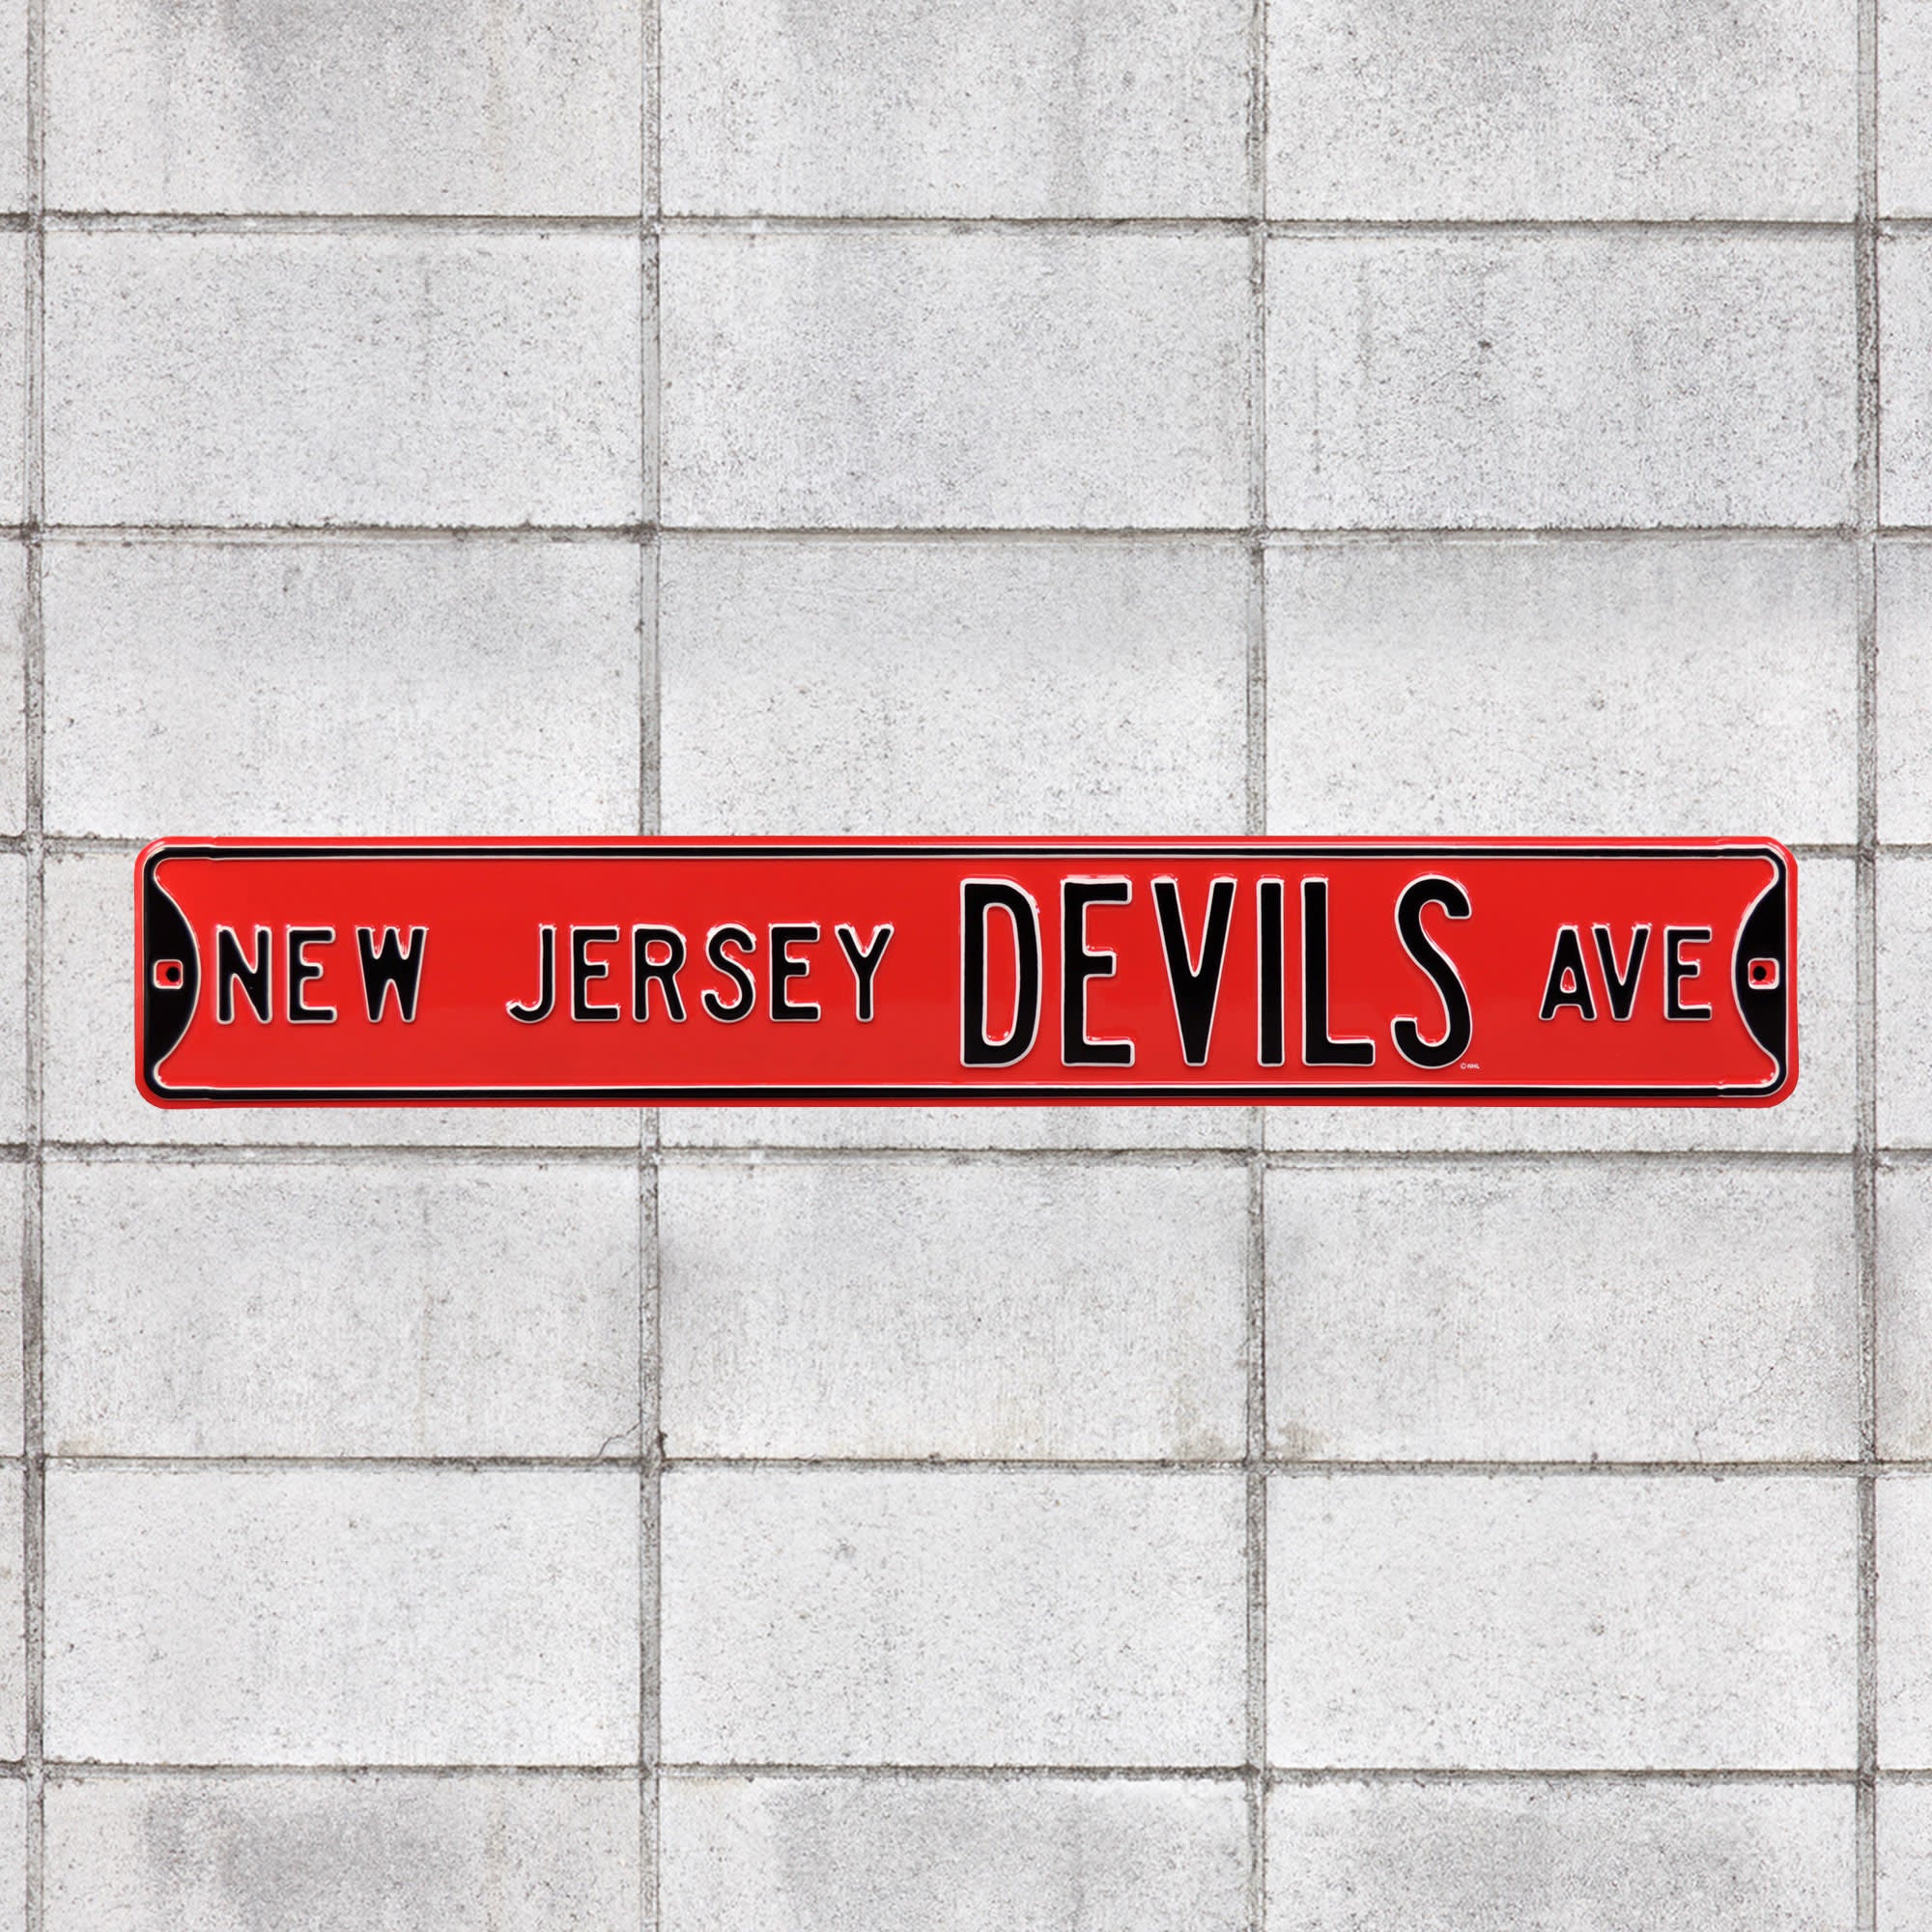 New Jersey Devils: New Jersey Devils Avenue - Officially Licensed NHL Metal Street Sign 36.0"W x 6.0"H by Fathead | 100% Steel